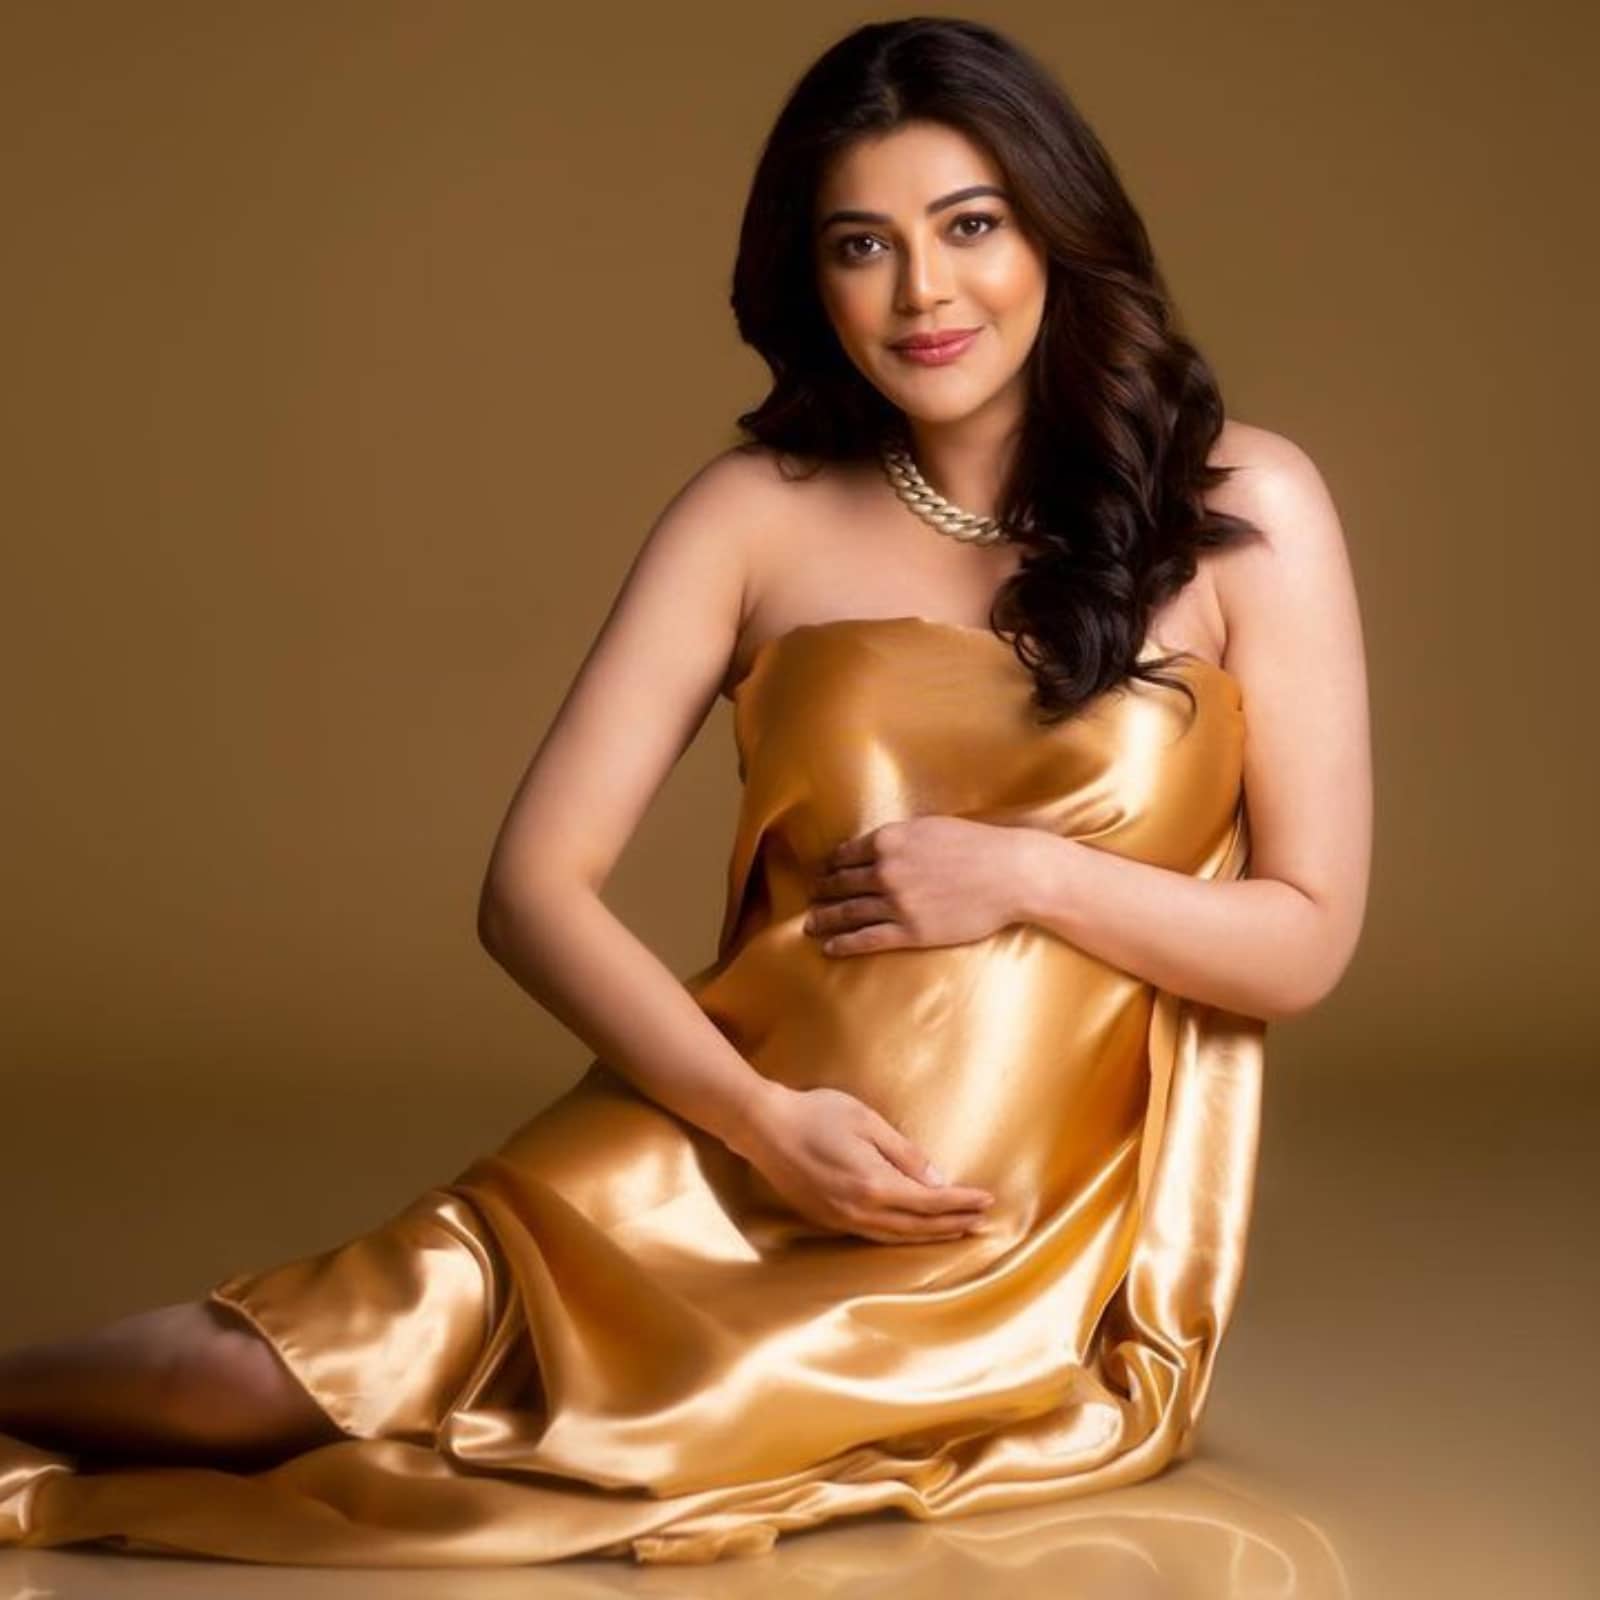 Samantha Kajal Sex Videos - Kajal Aggarwal Opens Up About Being A New Mom In Sweet Note, Samantha  Excited To Meet Baby Neil - News18